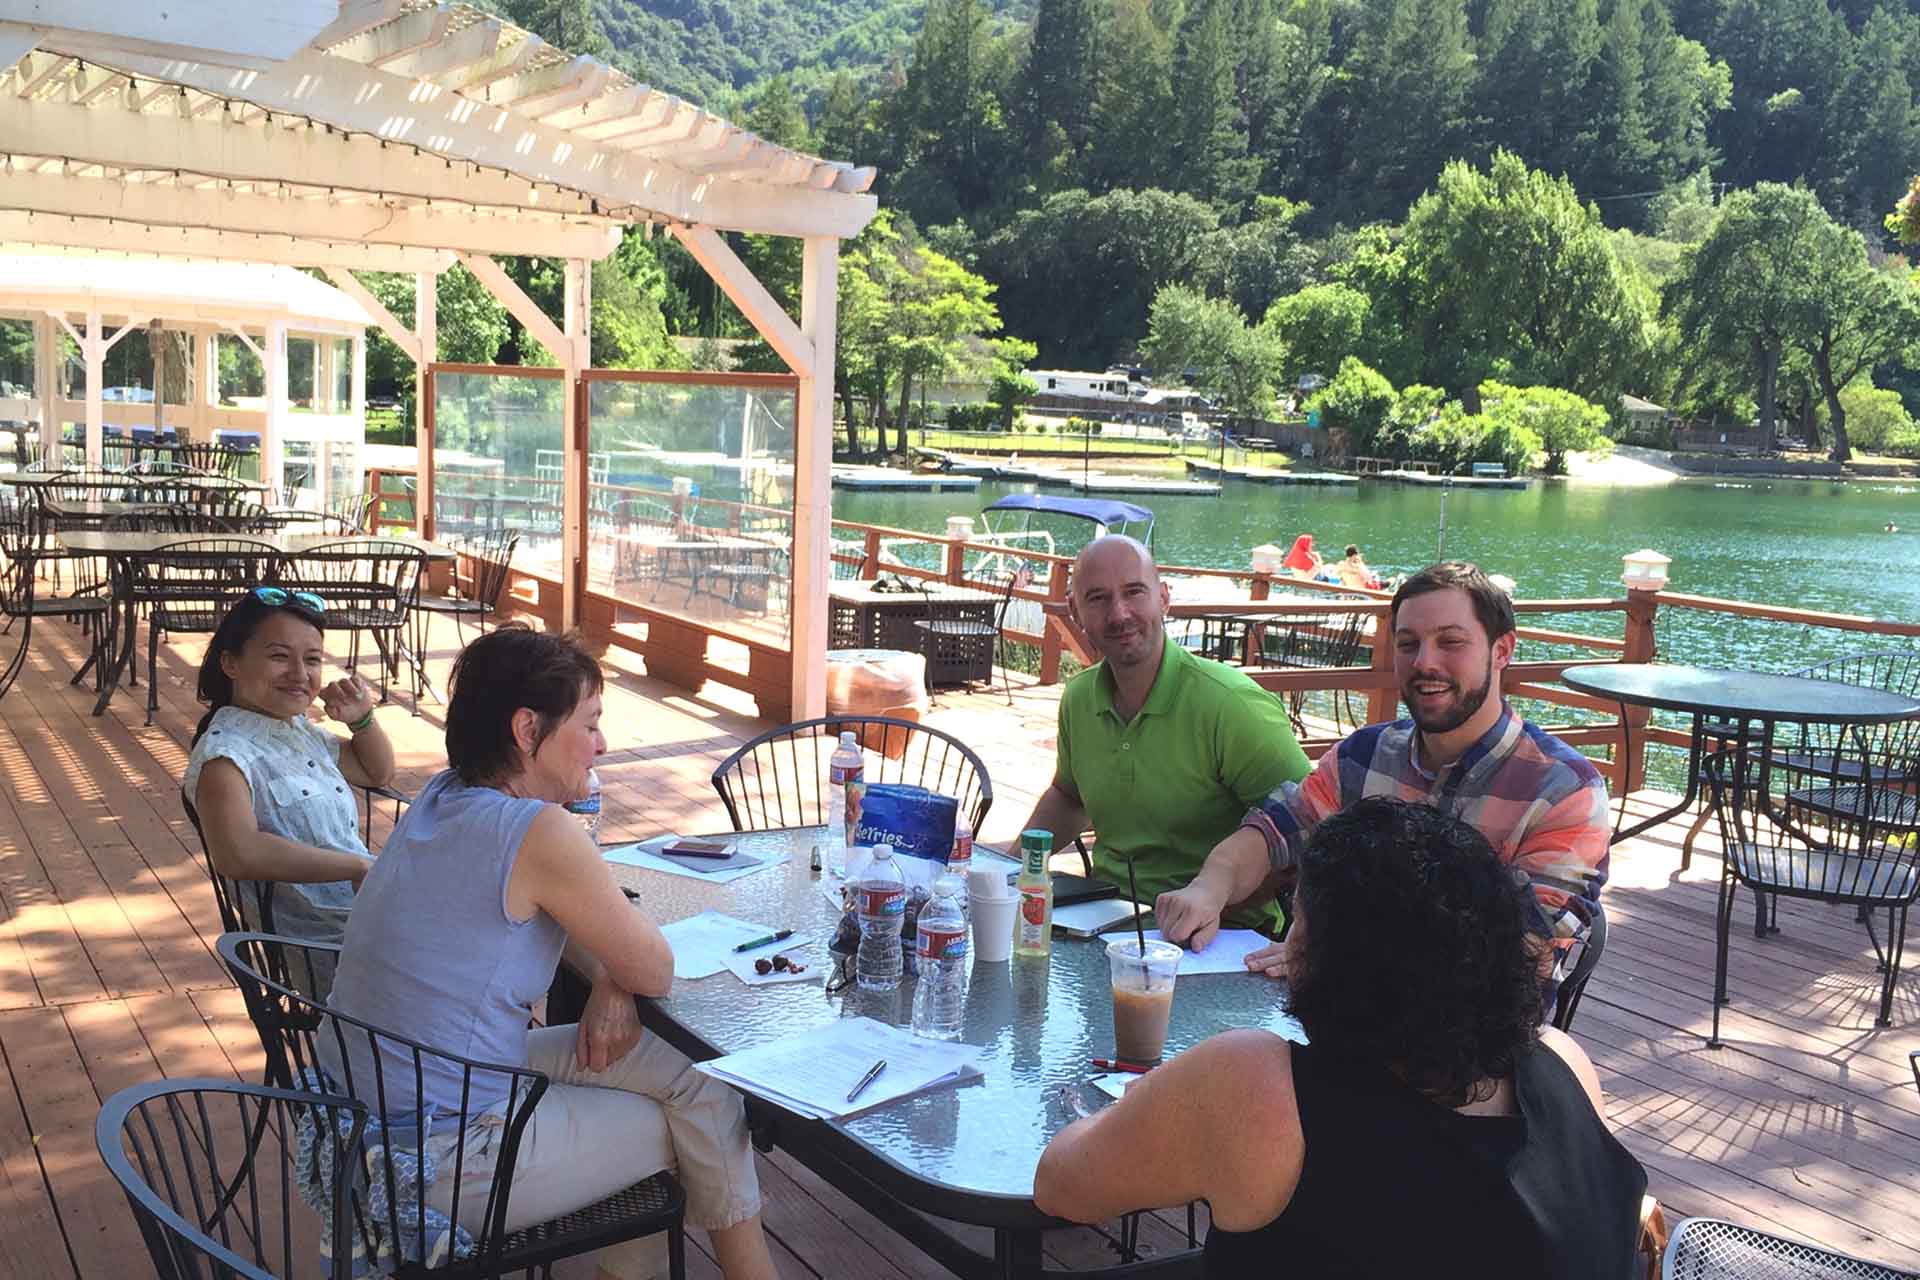 Collaborating during lunch, overlooking Blue Lake.